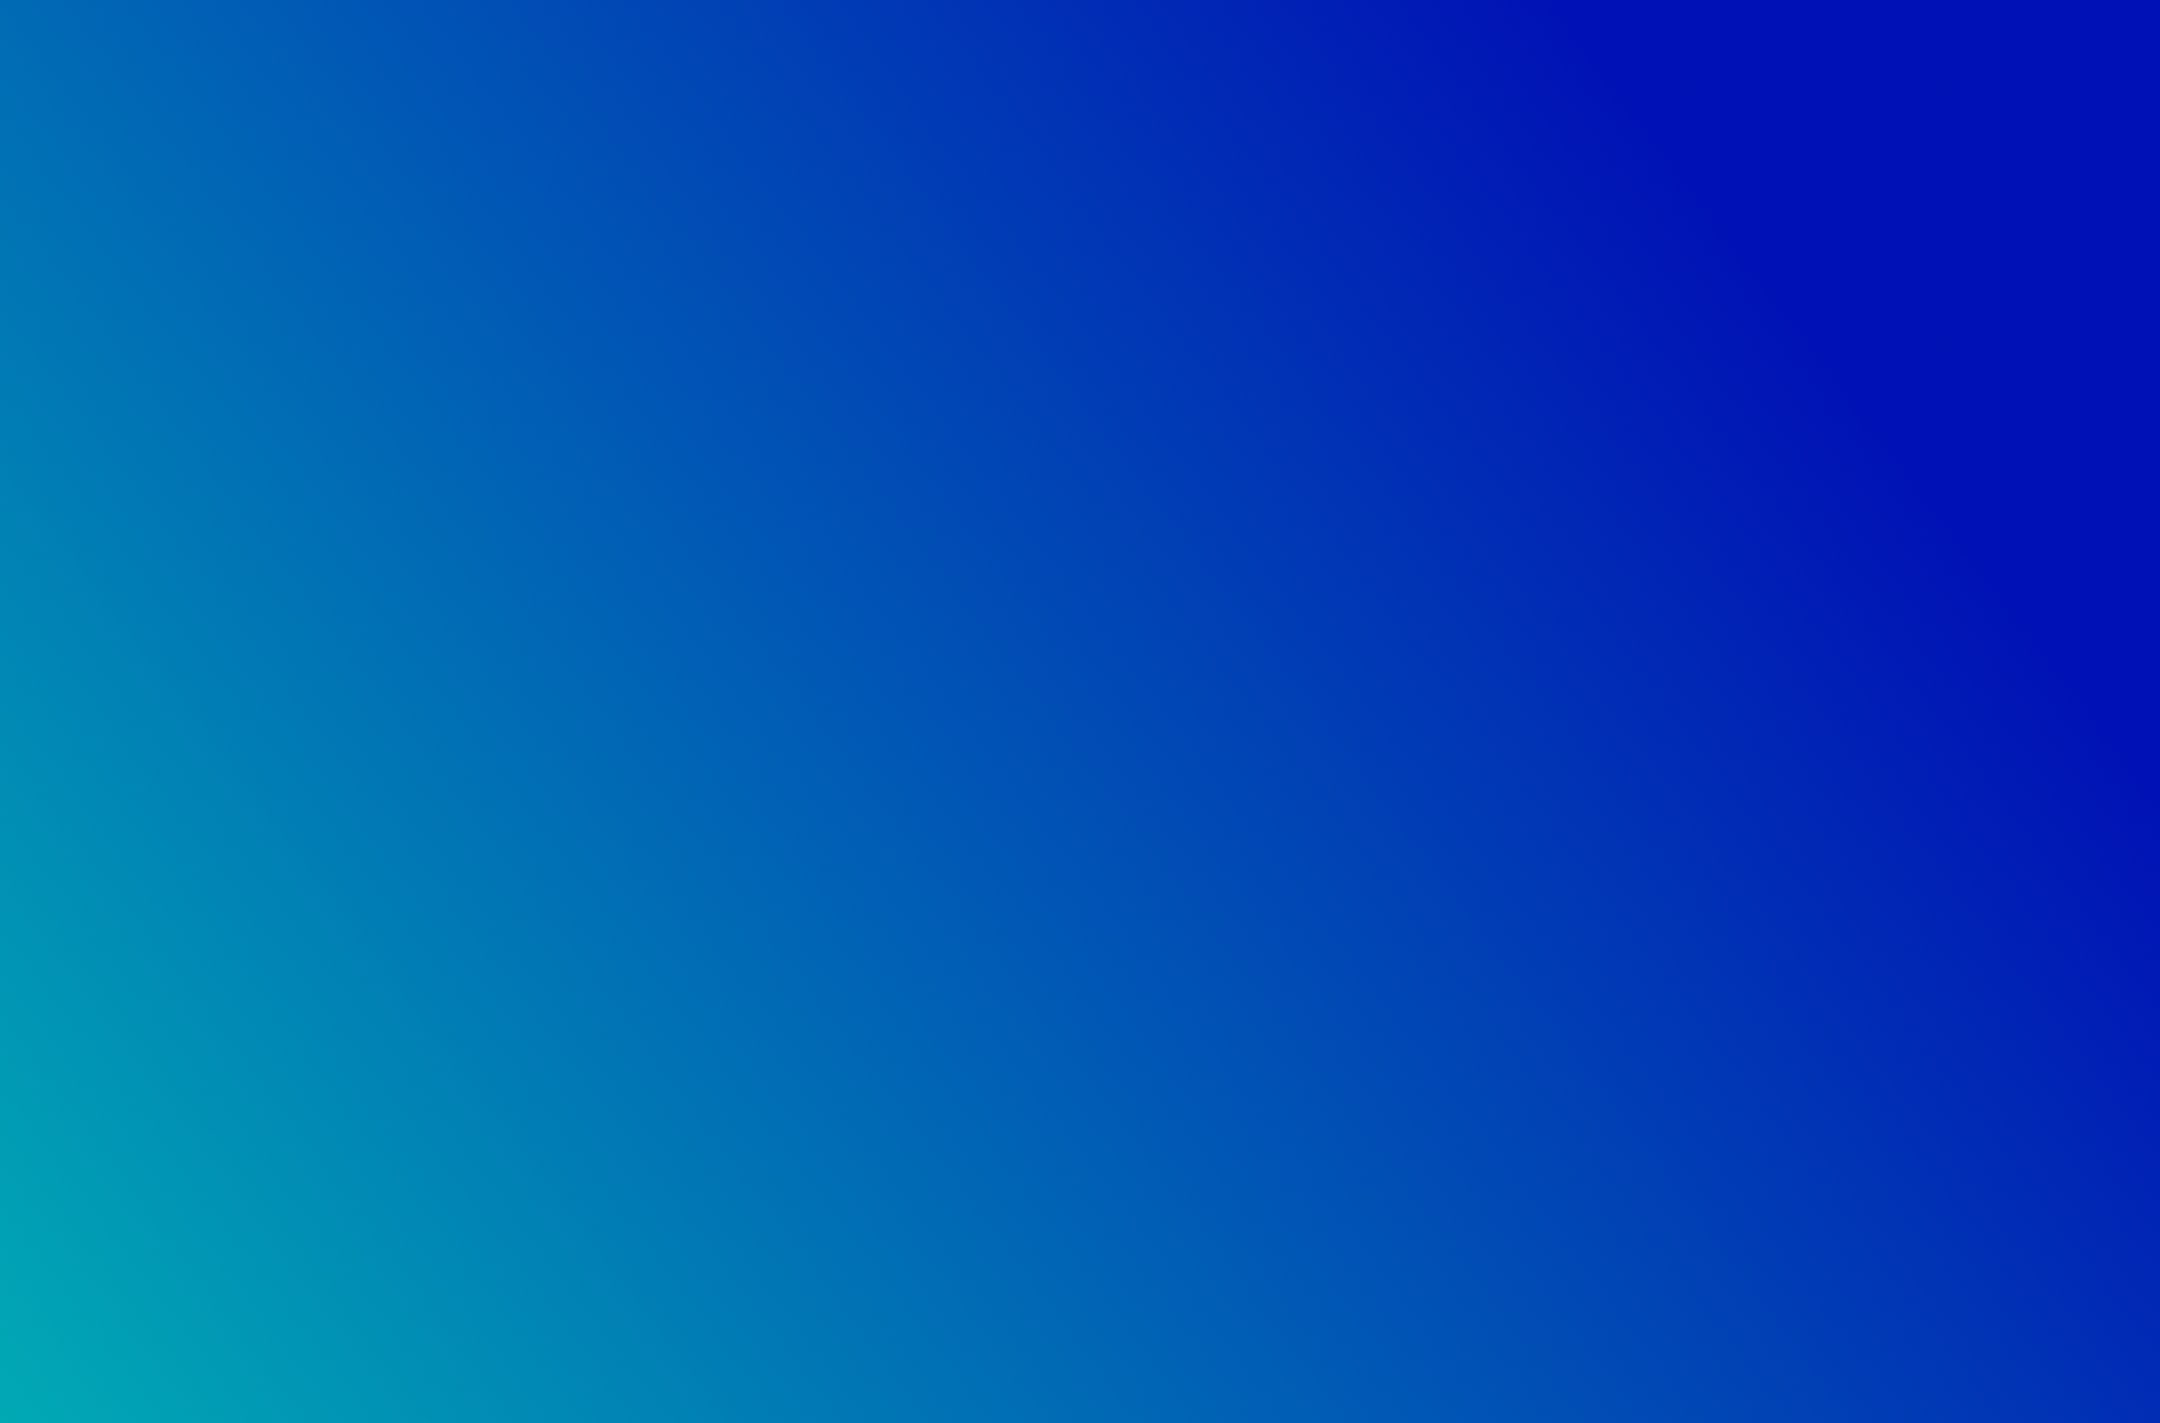 background with blue shades